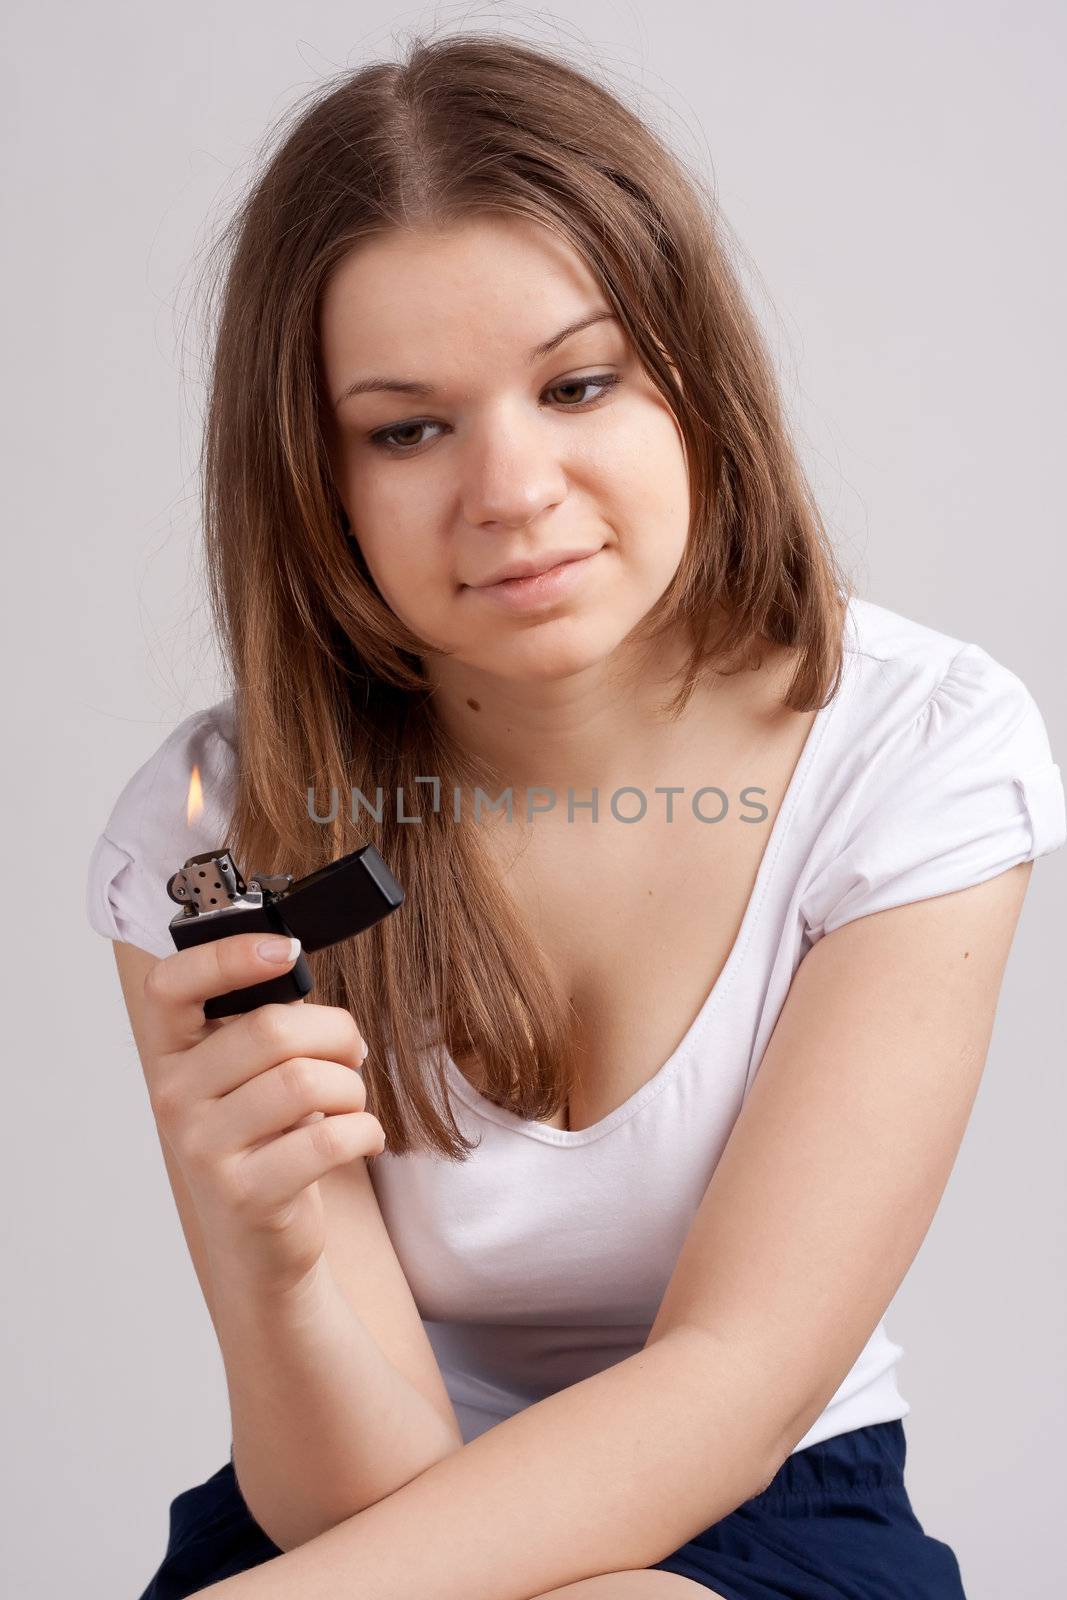 A girl holding a cigarette lighter and looks at her